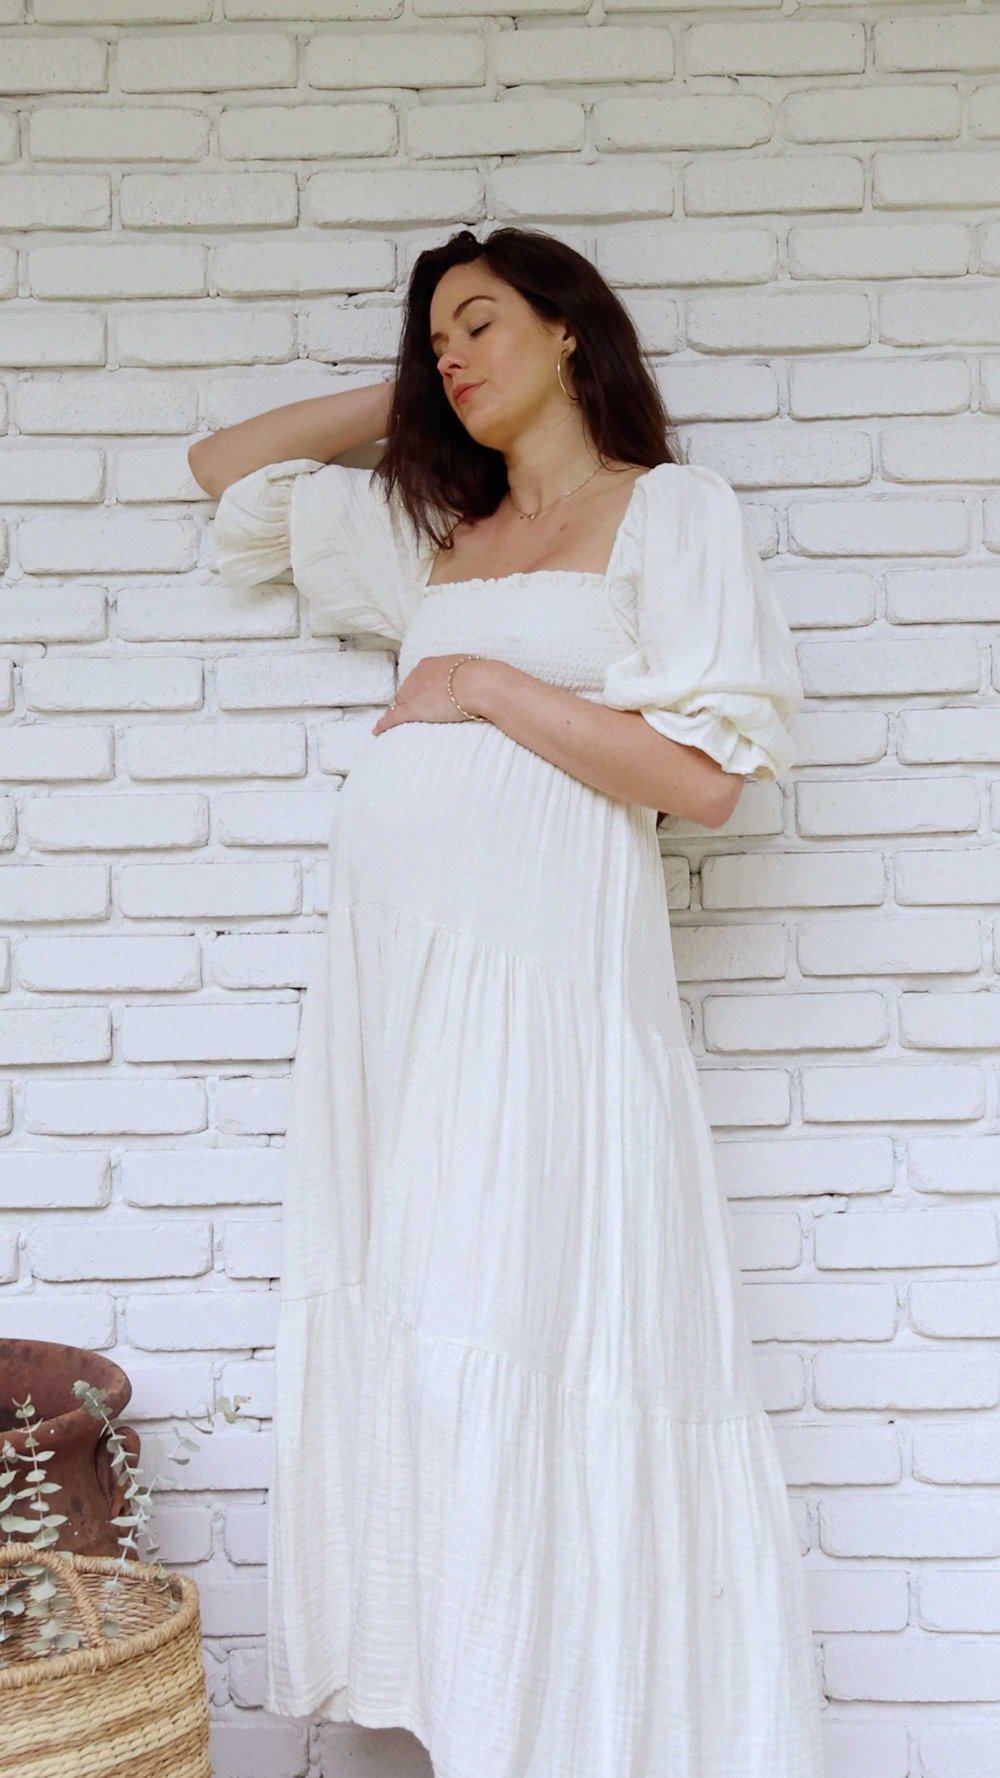 Cute cottage style summer maternity dress. @sarahchristine wearing Nothing Fits But Kiko Dress Soft muslin dress with puffed sleeves, smocked chest and sleeves in Seattle, Washington -2.jpg